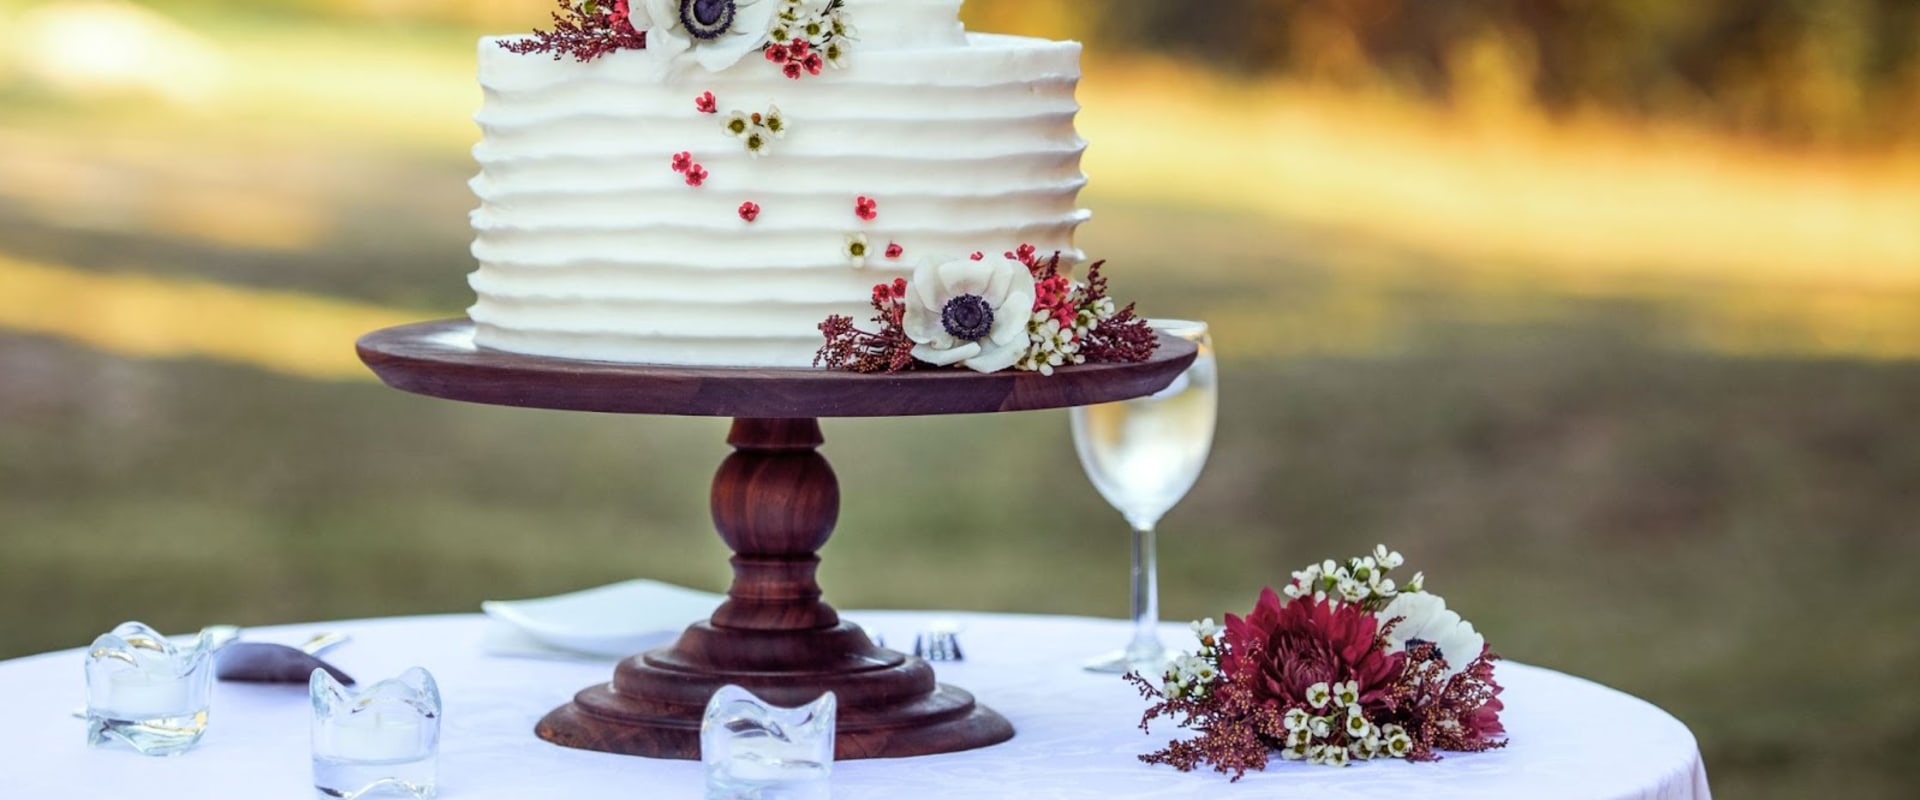 Wedding Bakery and Dessert Reviews: A Comprehensive Guide to Choosing the Perfect Supplier